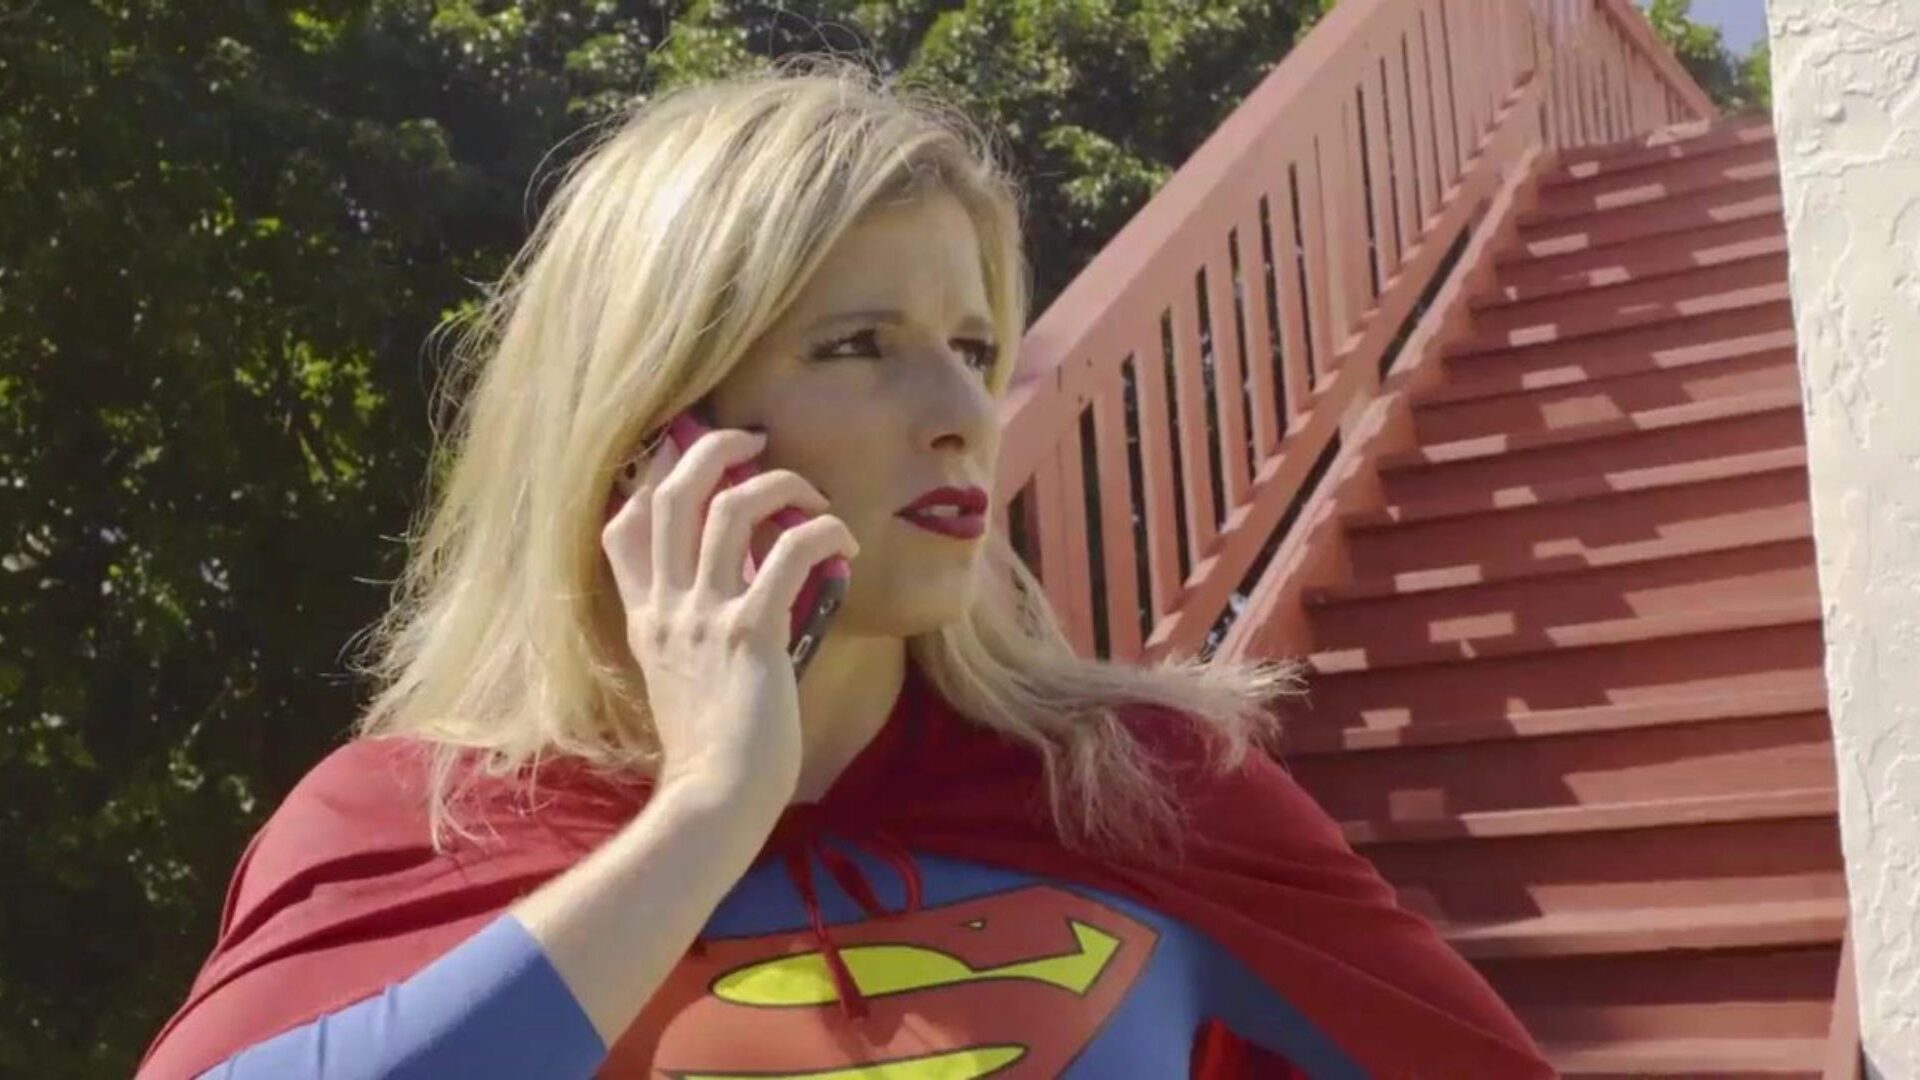 Cory Chase in Super Gurl is Anally Dominated